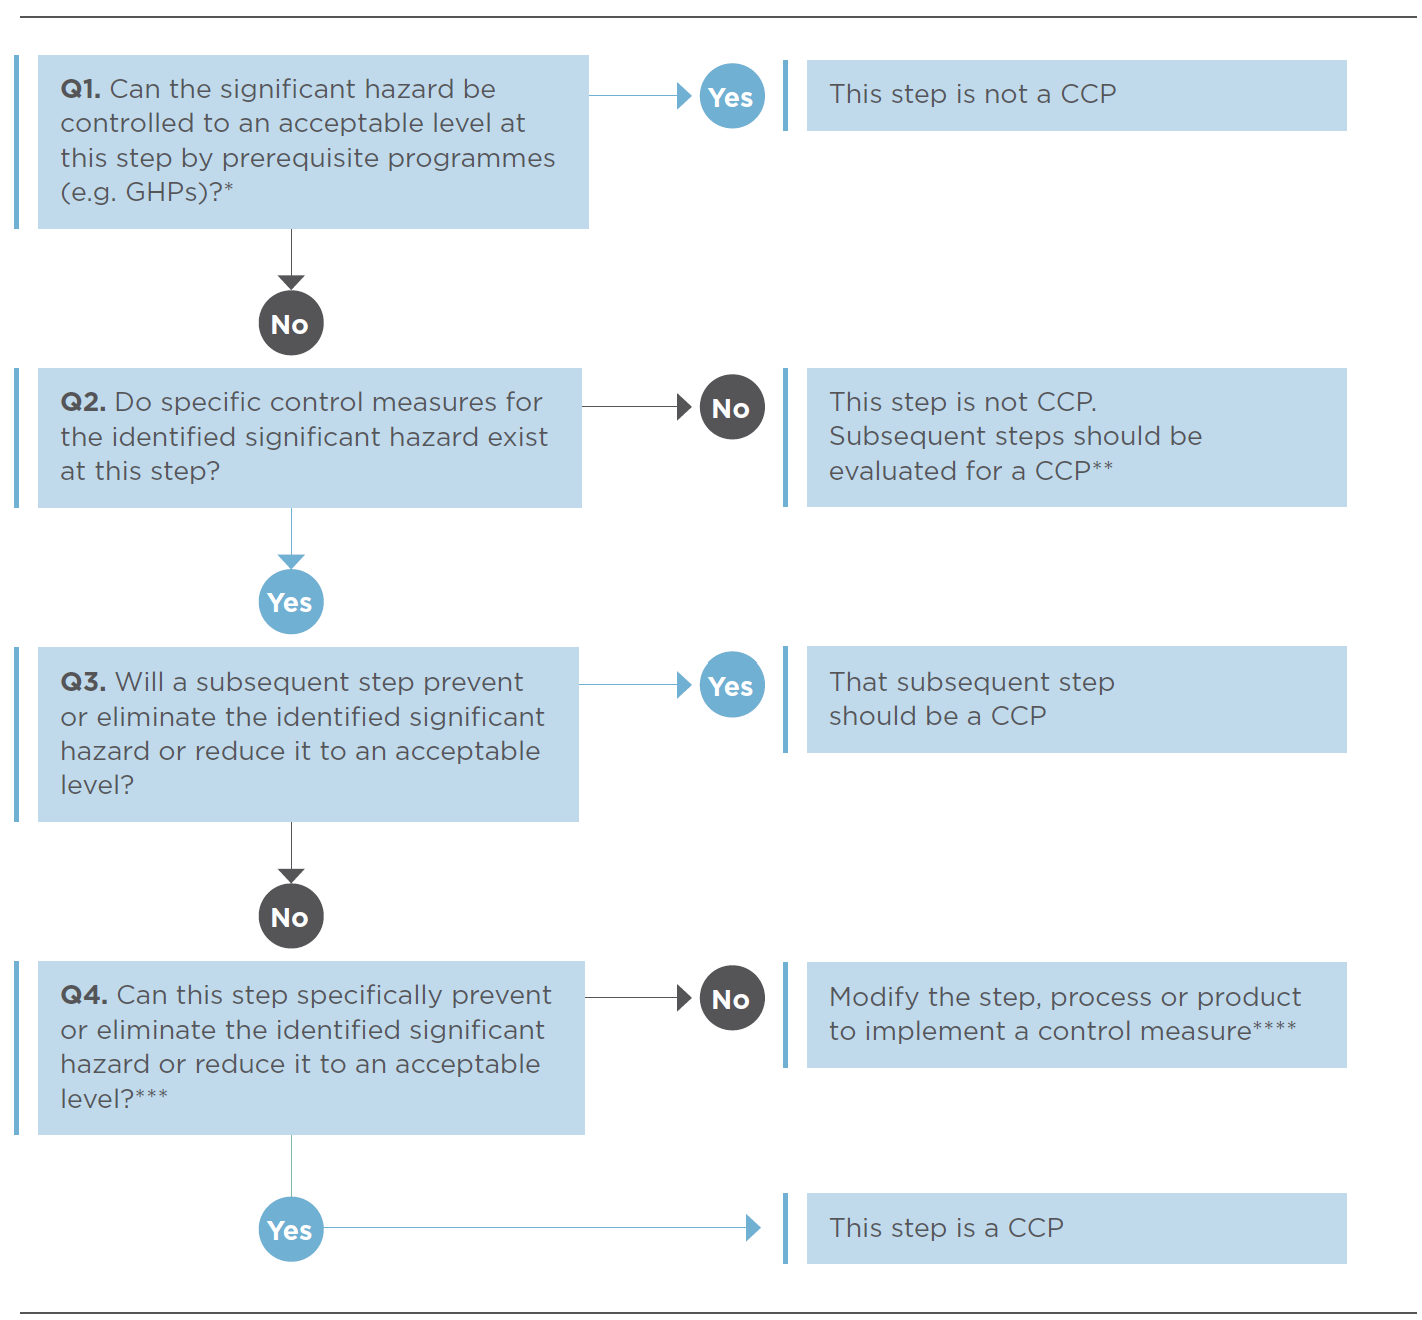 Example of a CCP decision tree